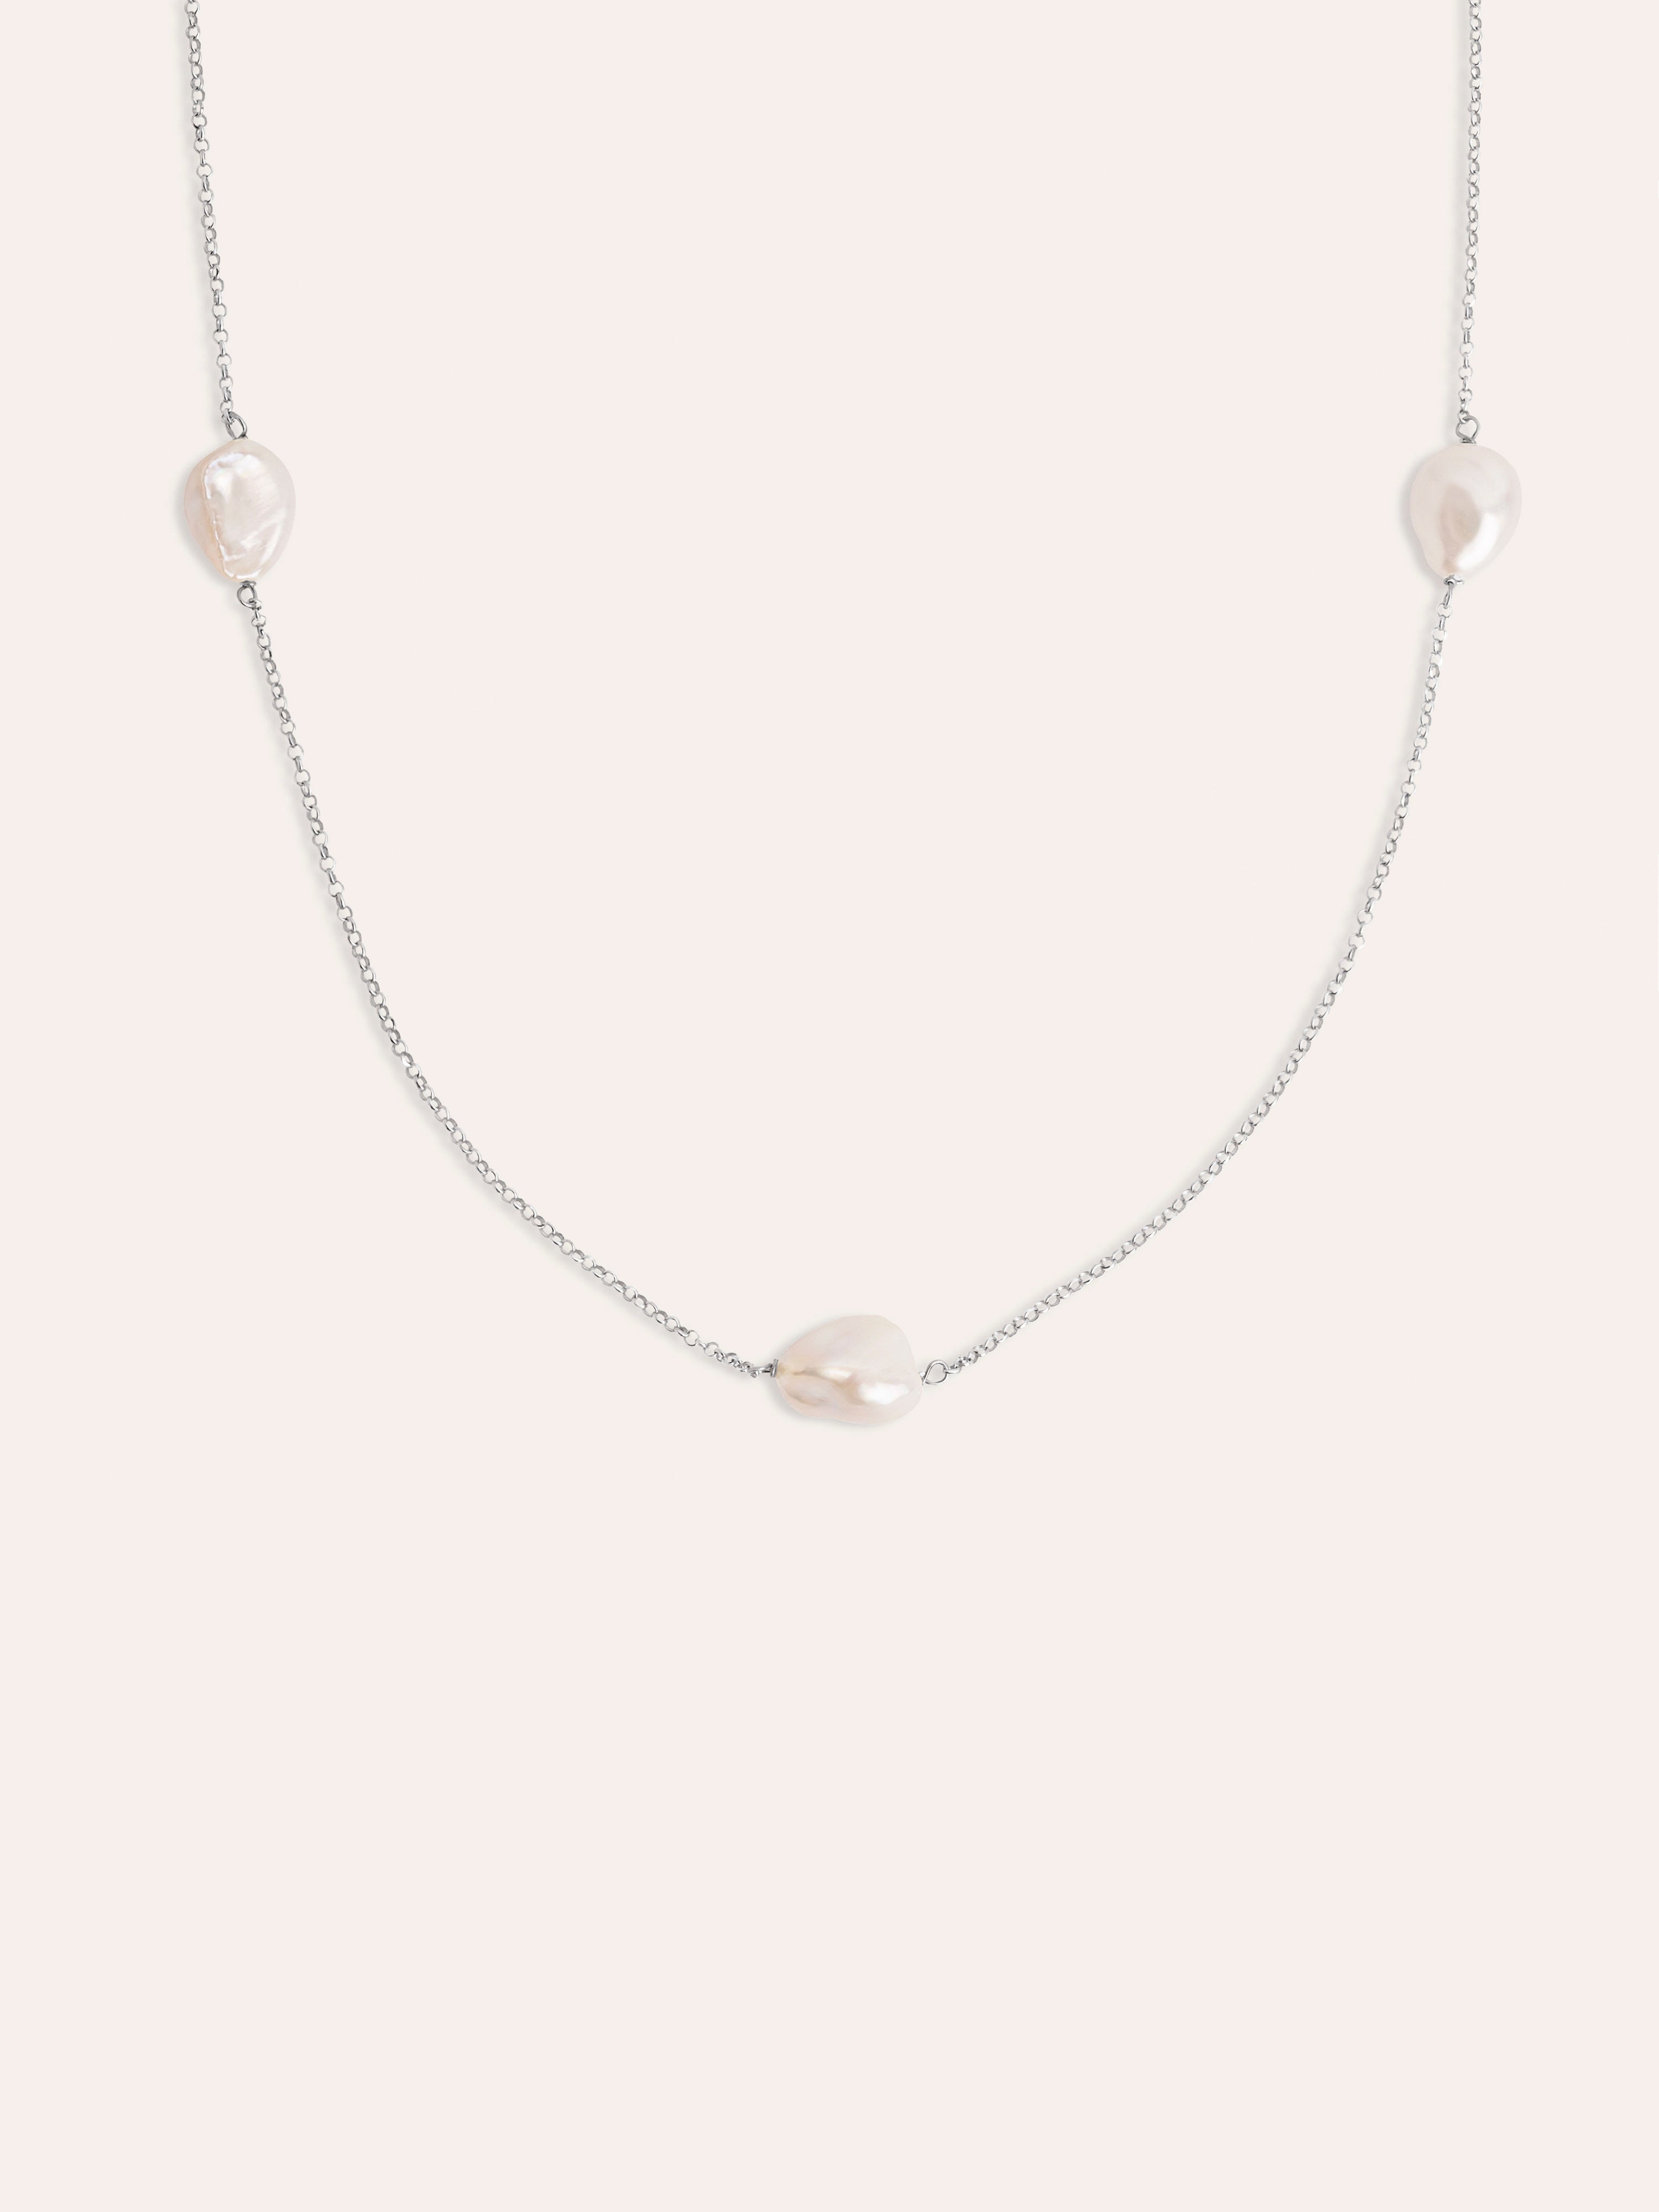 Bean Pearls Silver Necklace